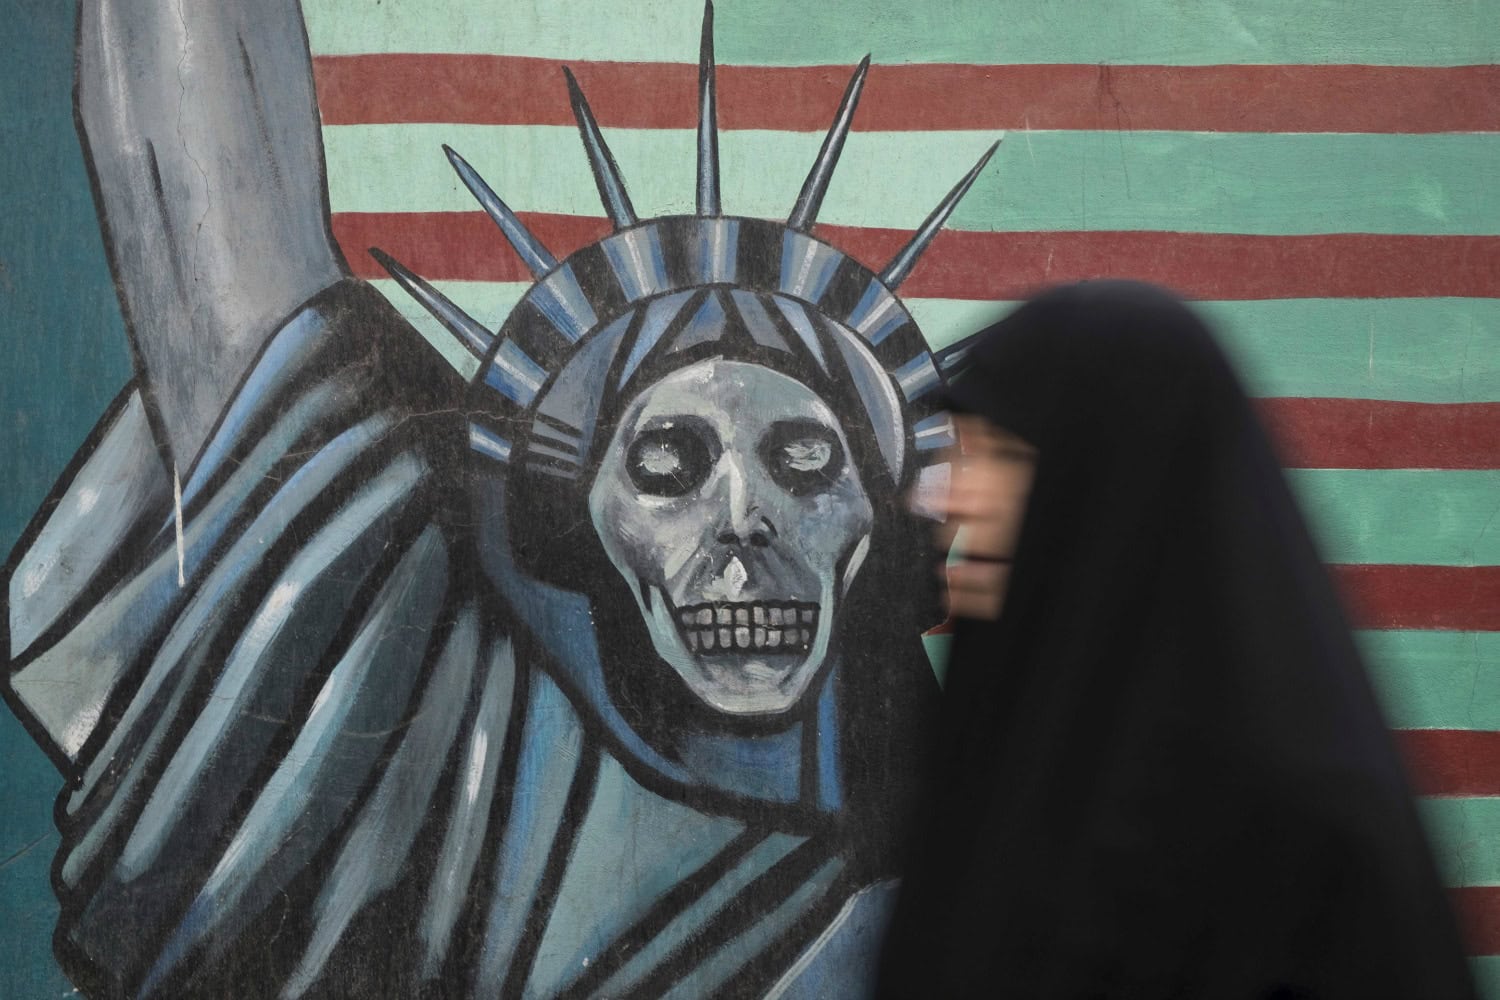 Iran celebrates the 36th anniversary of the U.S. embassy attack shouting “Death to America”